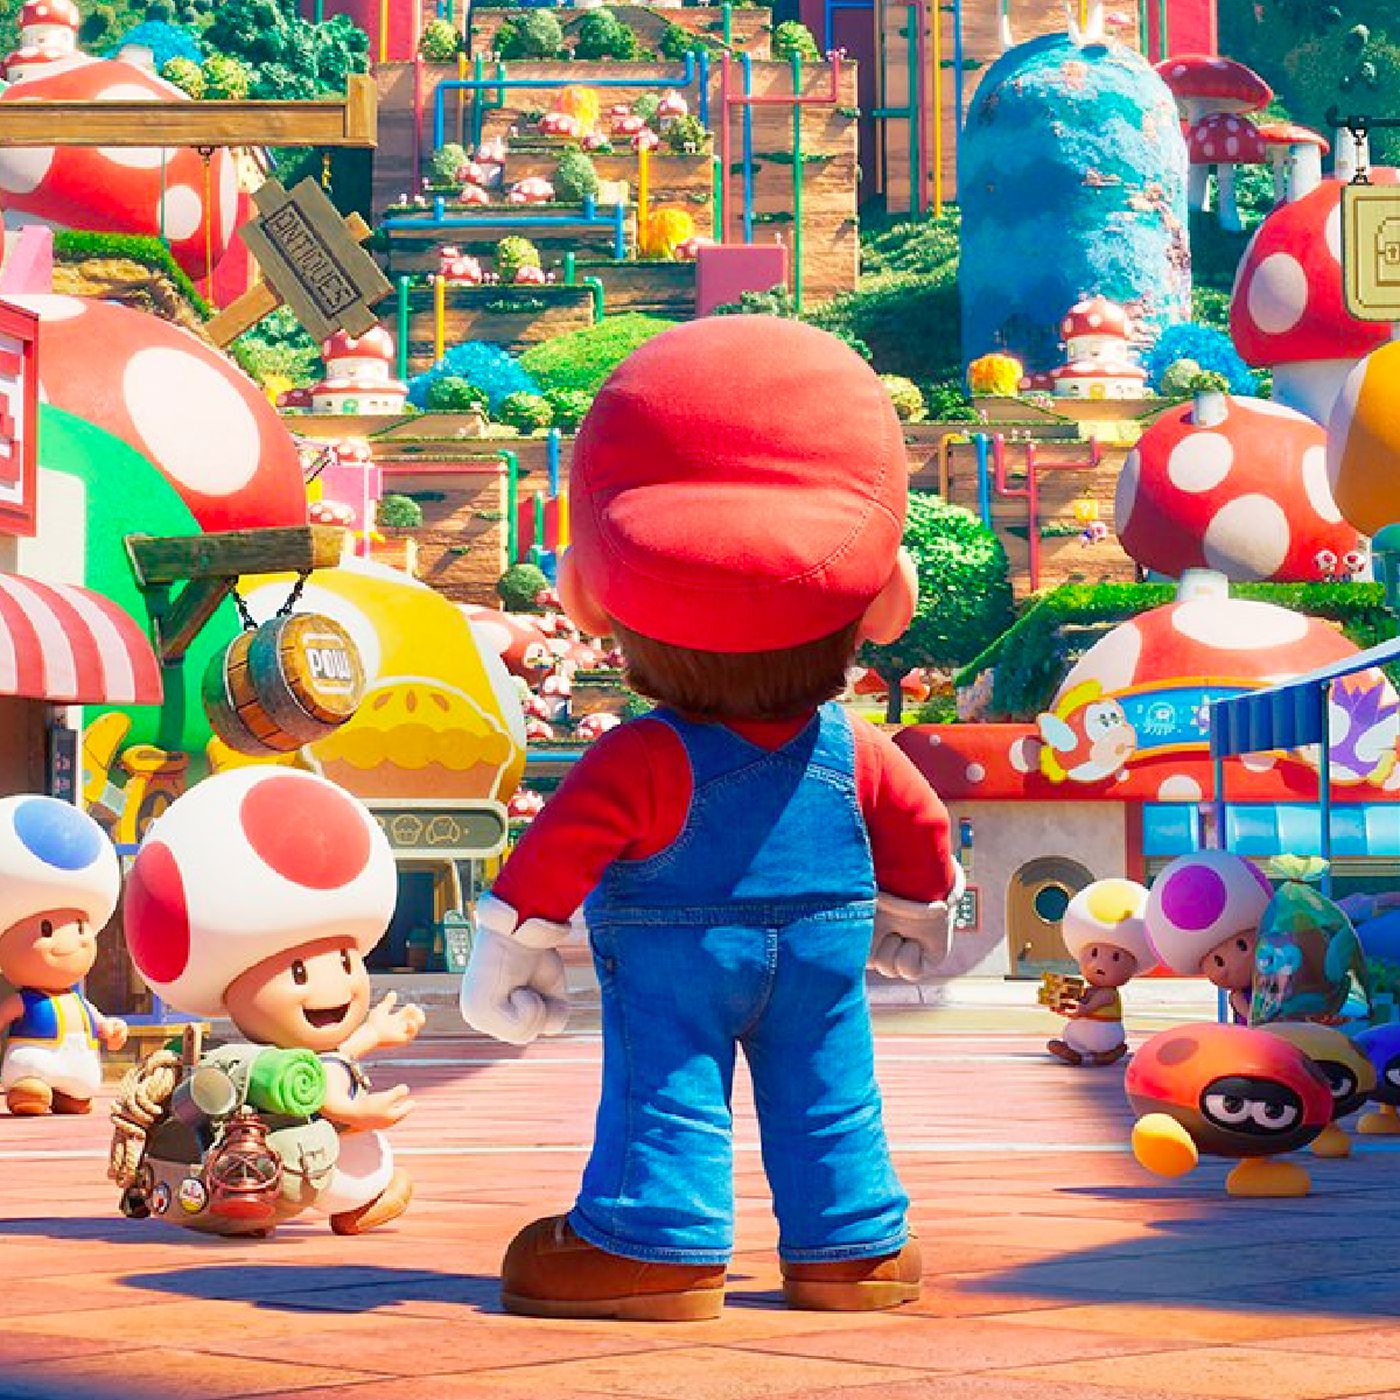 Super Mario movie Nintendo Direct announced, first poster revealed